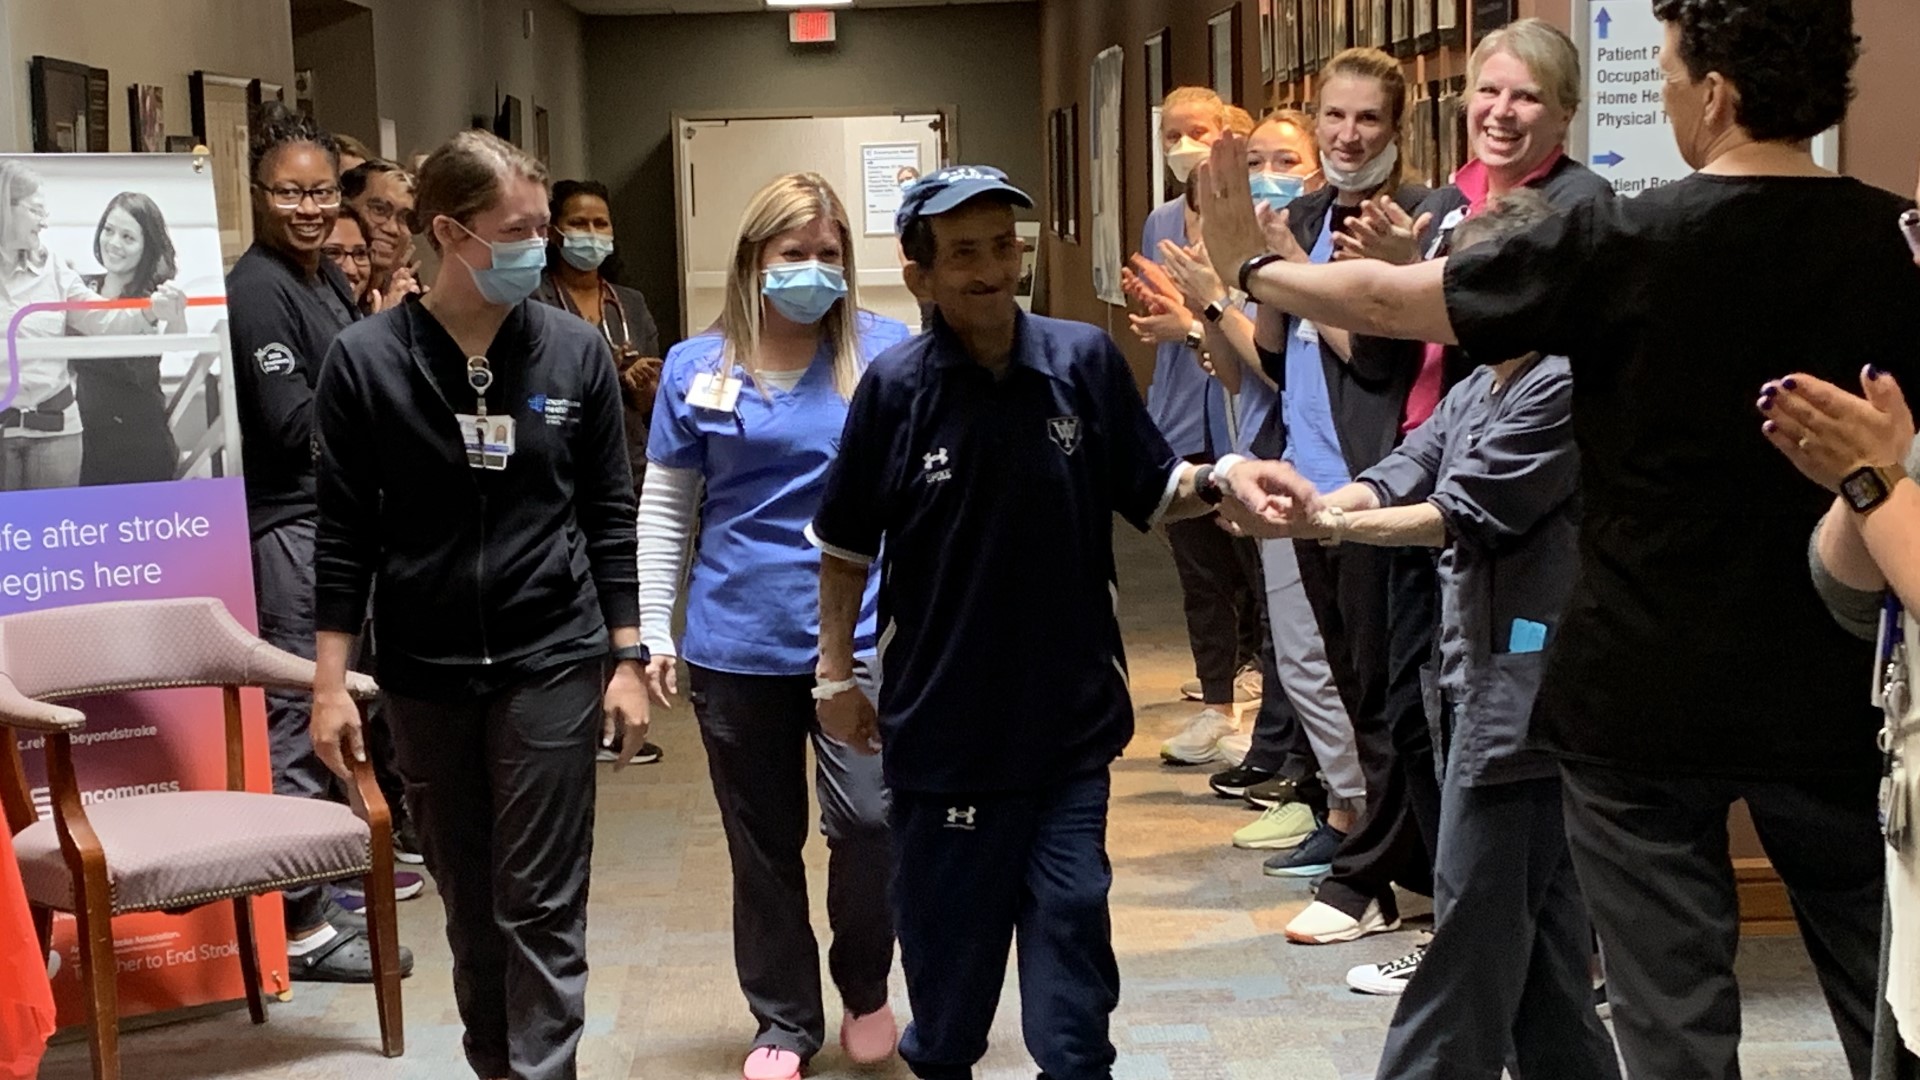 Joseph "Spike" Bahn left the Encompass Rehabilitation Hospital of York to a standing ovation from nurses and therapists.